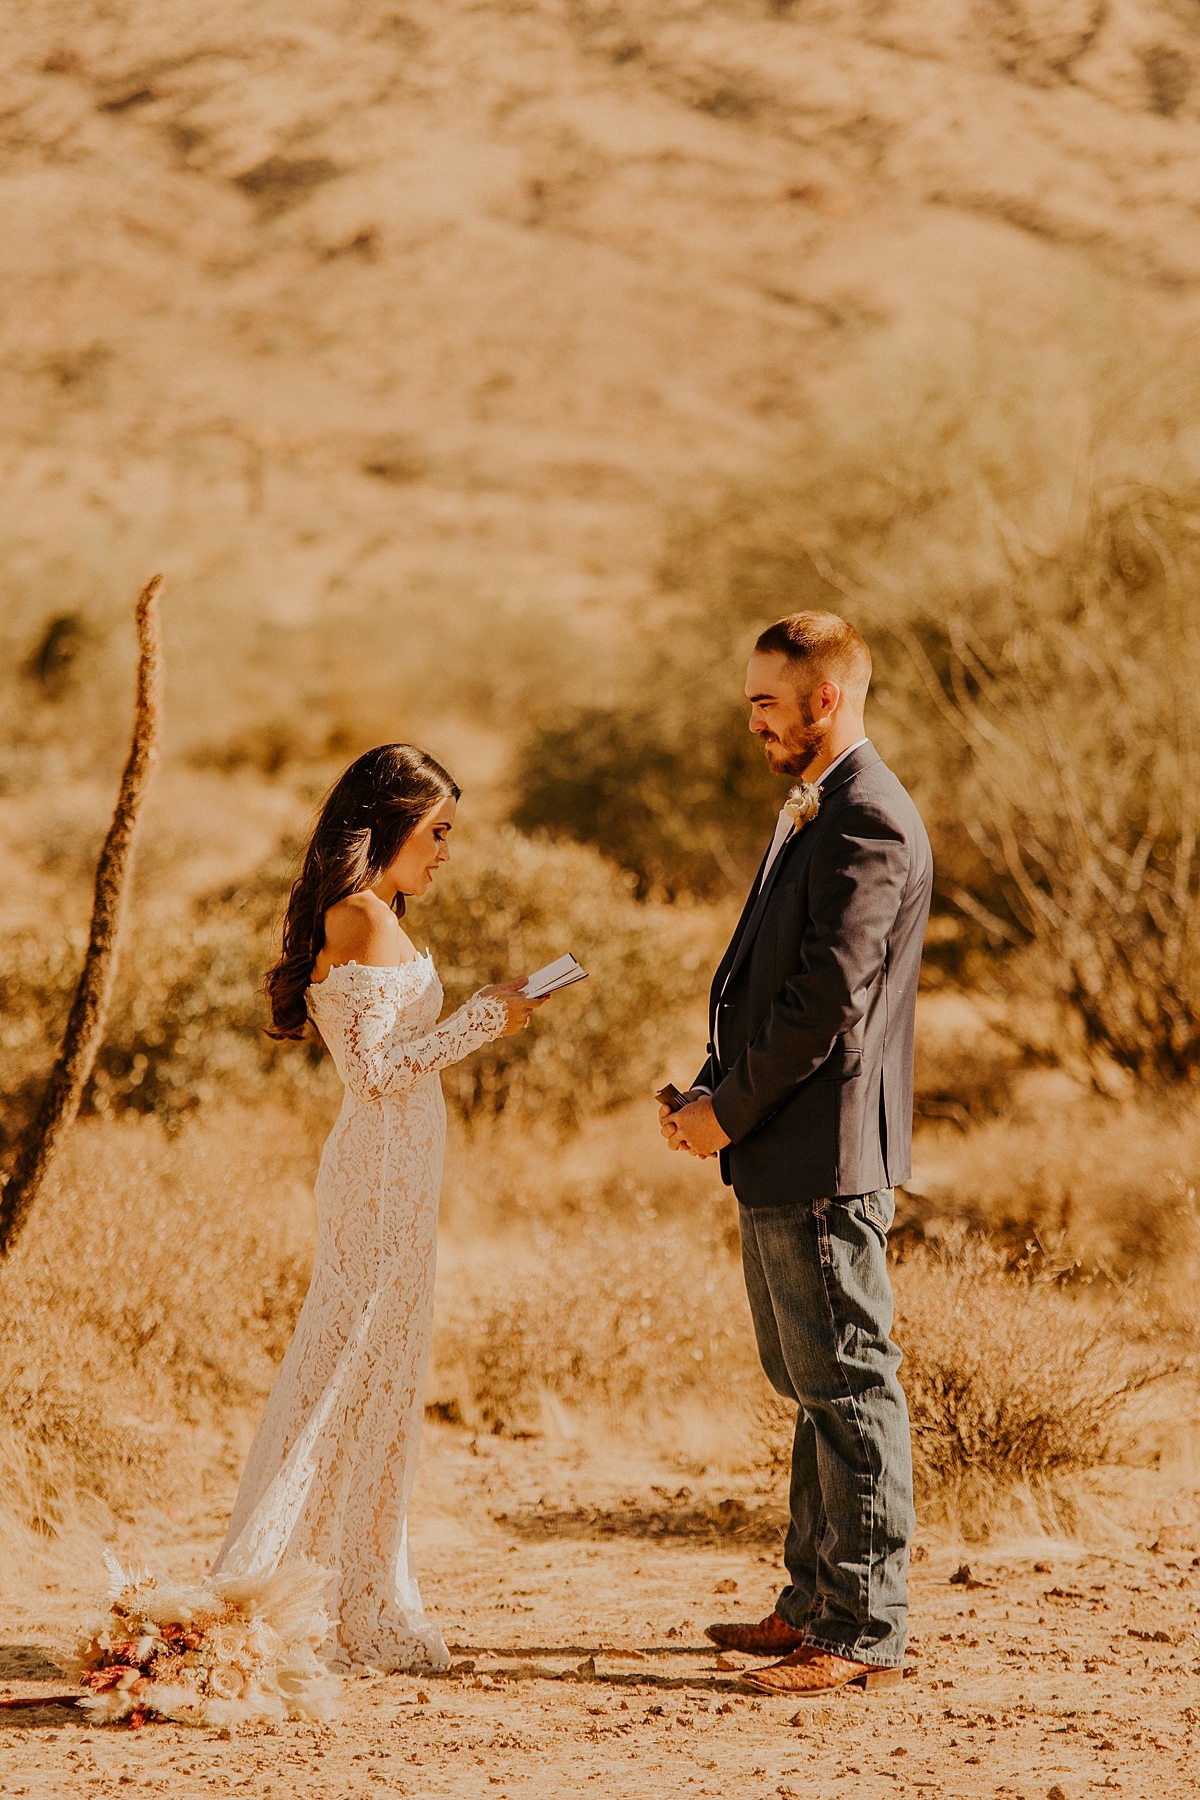 Intimate-elopement-in-superstition-mountain-wilderness-allison-slater-photography18.jpg